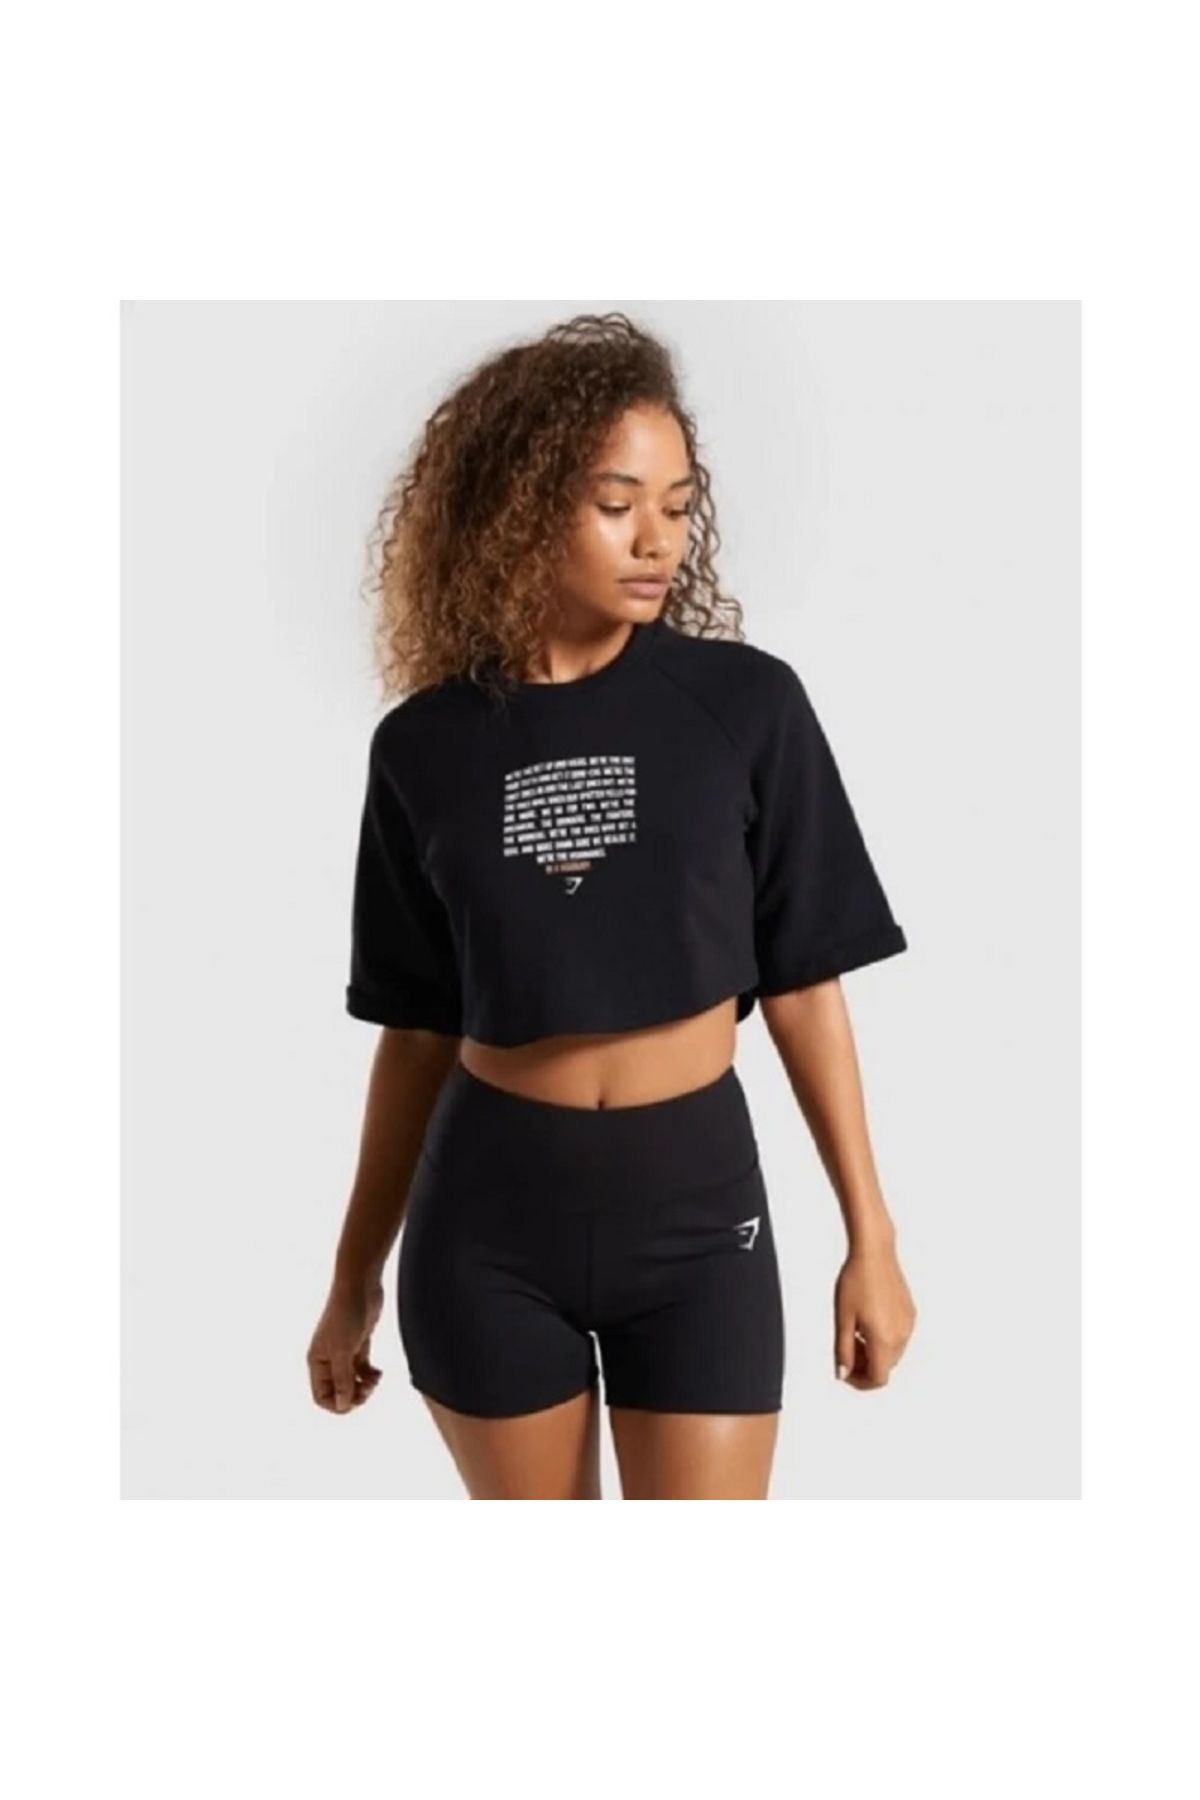 RACER Gymshark The Visionaries Boxy Cropped Sweater Black GLCT3788